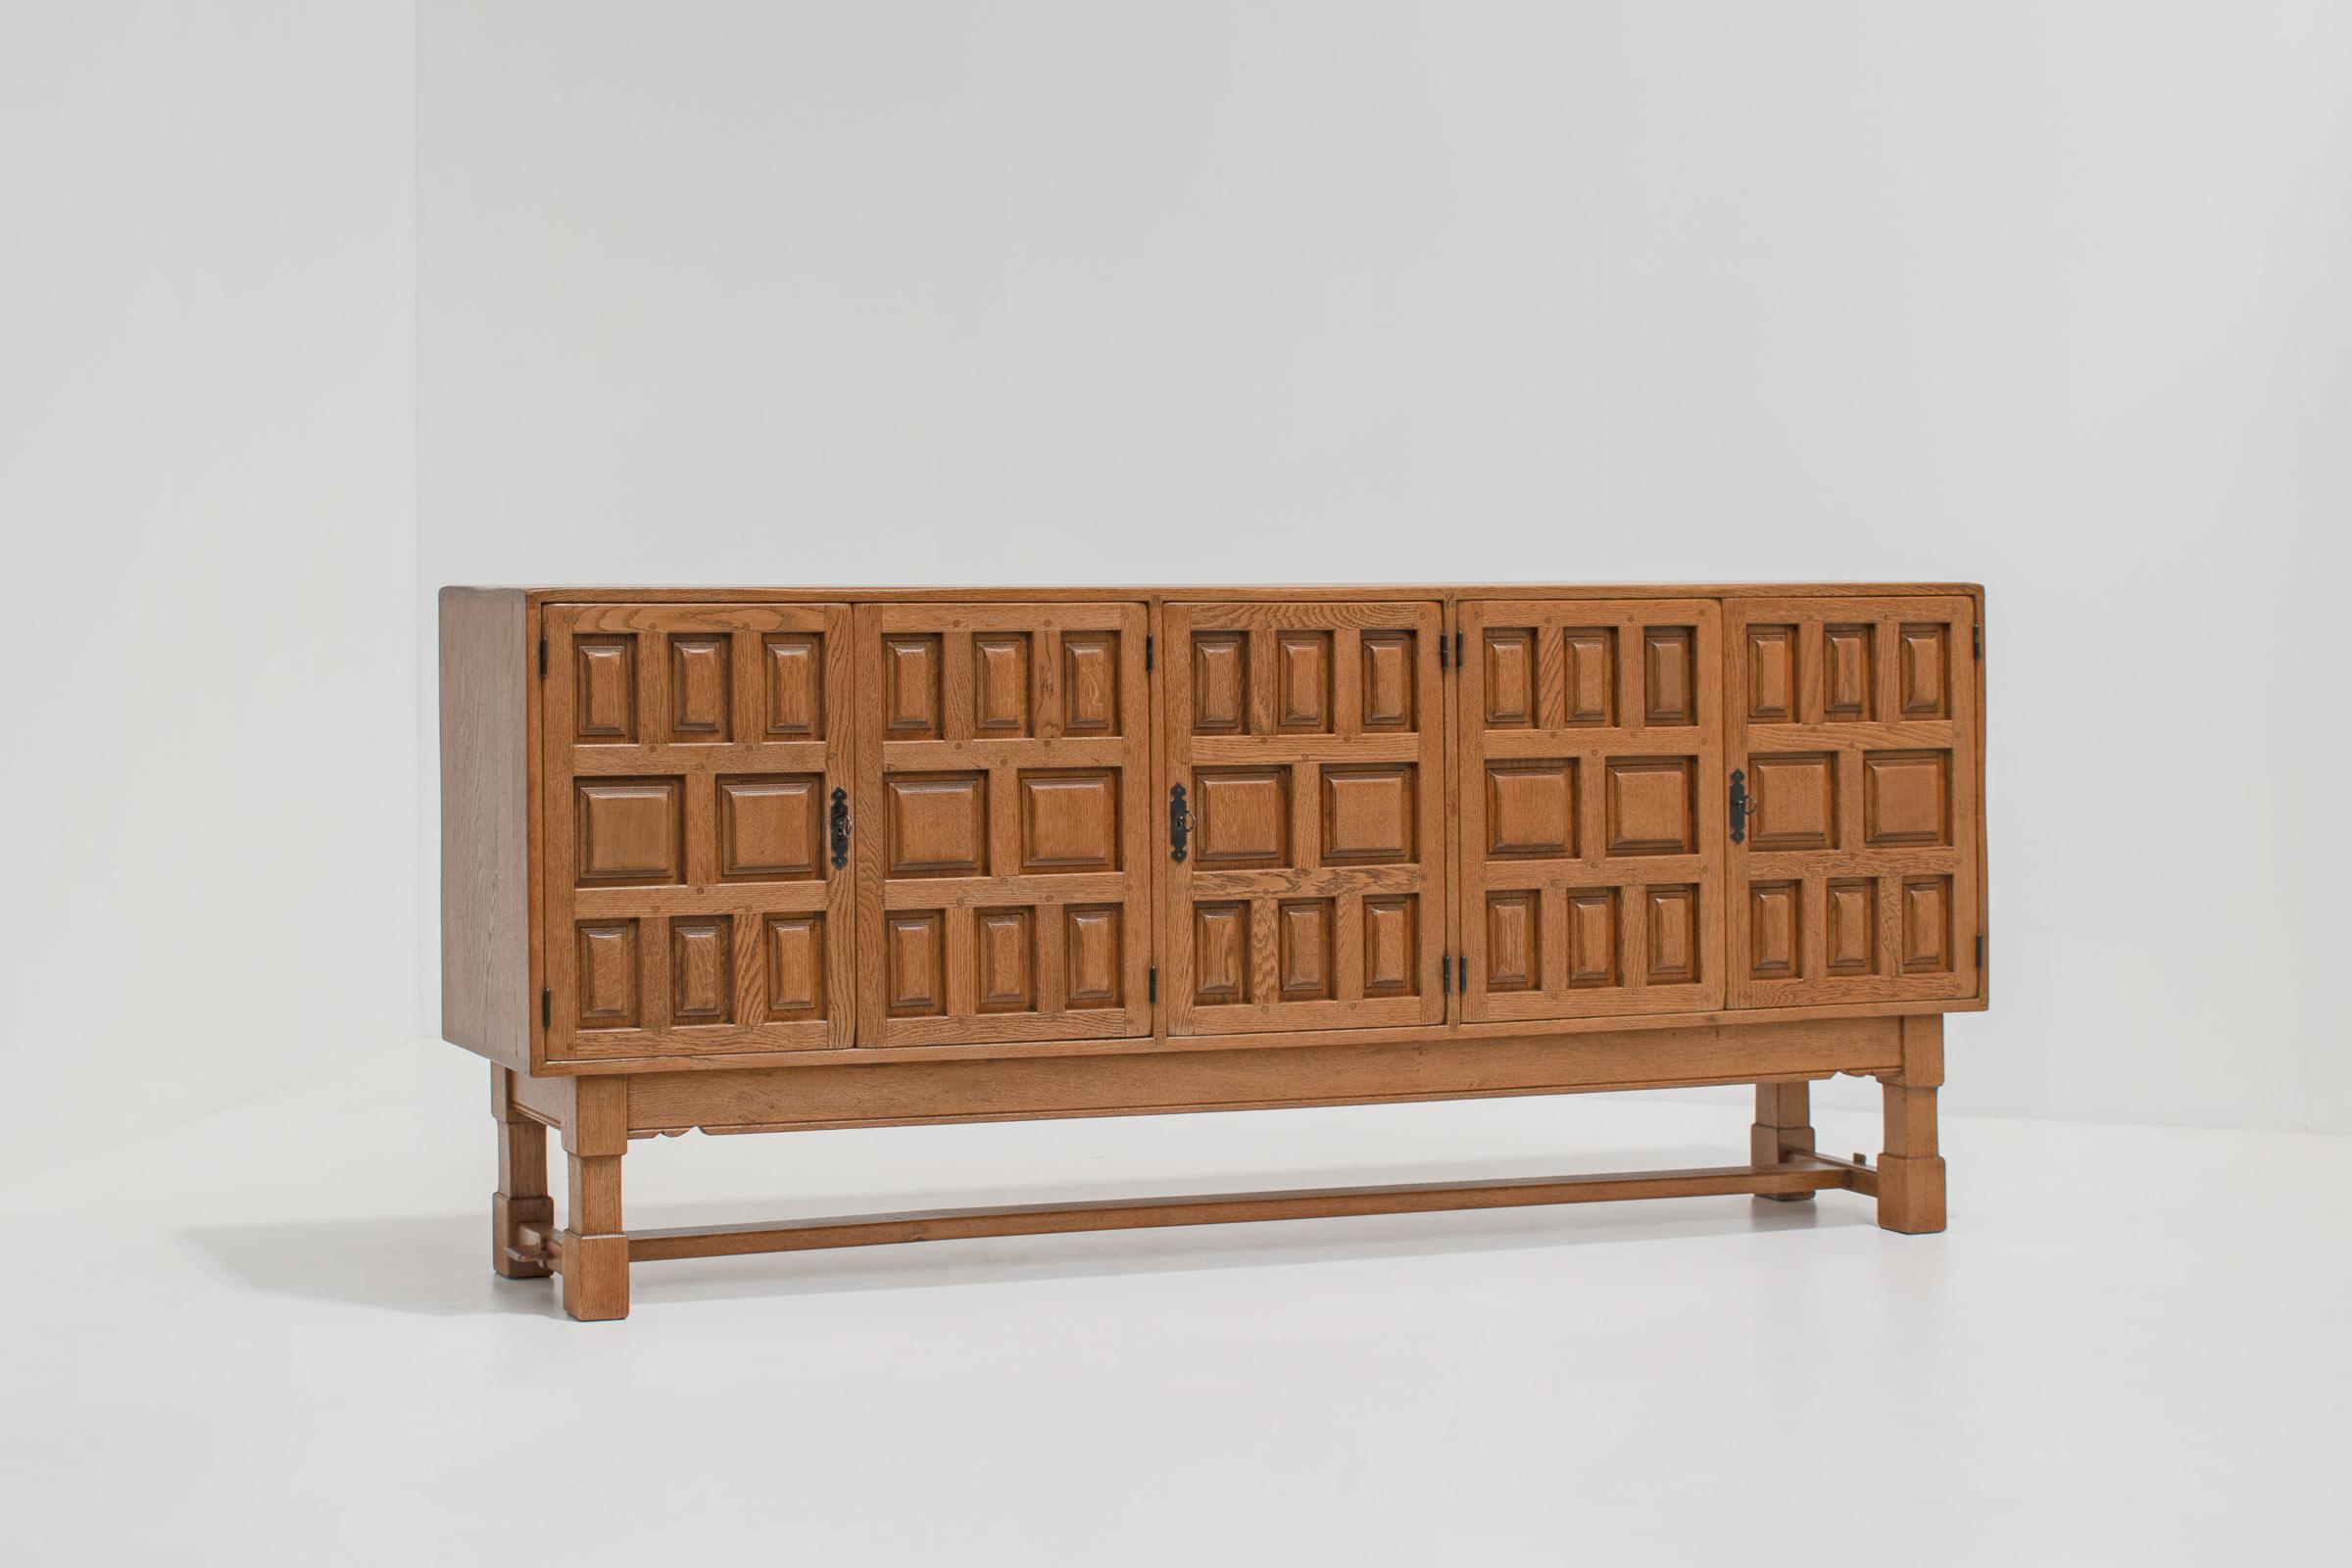 Solid oak Brutalist sideboard with wrought iron details, Spain, 1940s.

A timeless piece of brutalist craftmanship from the 1940s. The sideboard has a beautiful asymmetrical structure on the oak door panels and is finished with elegant patinated